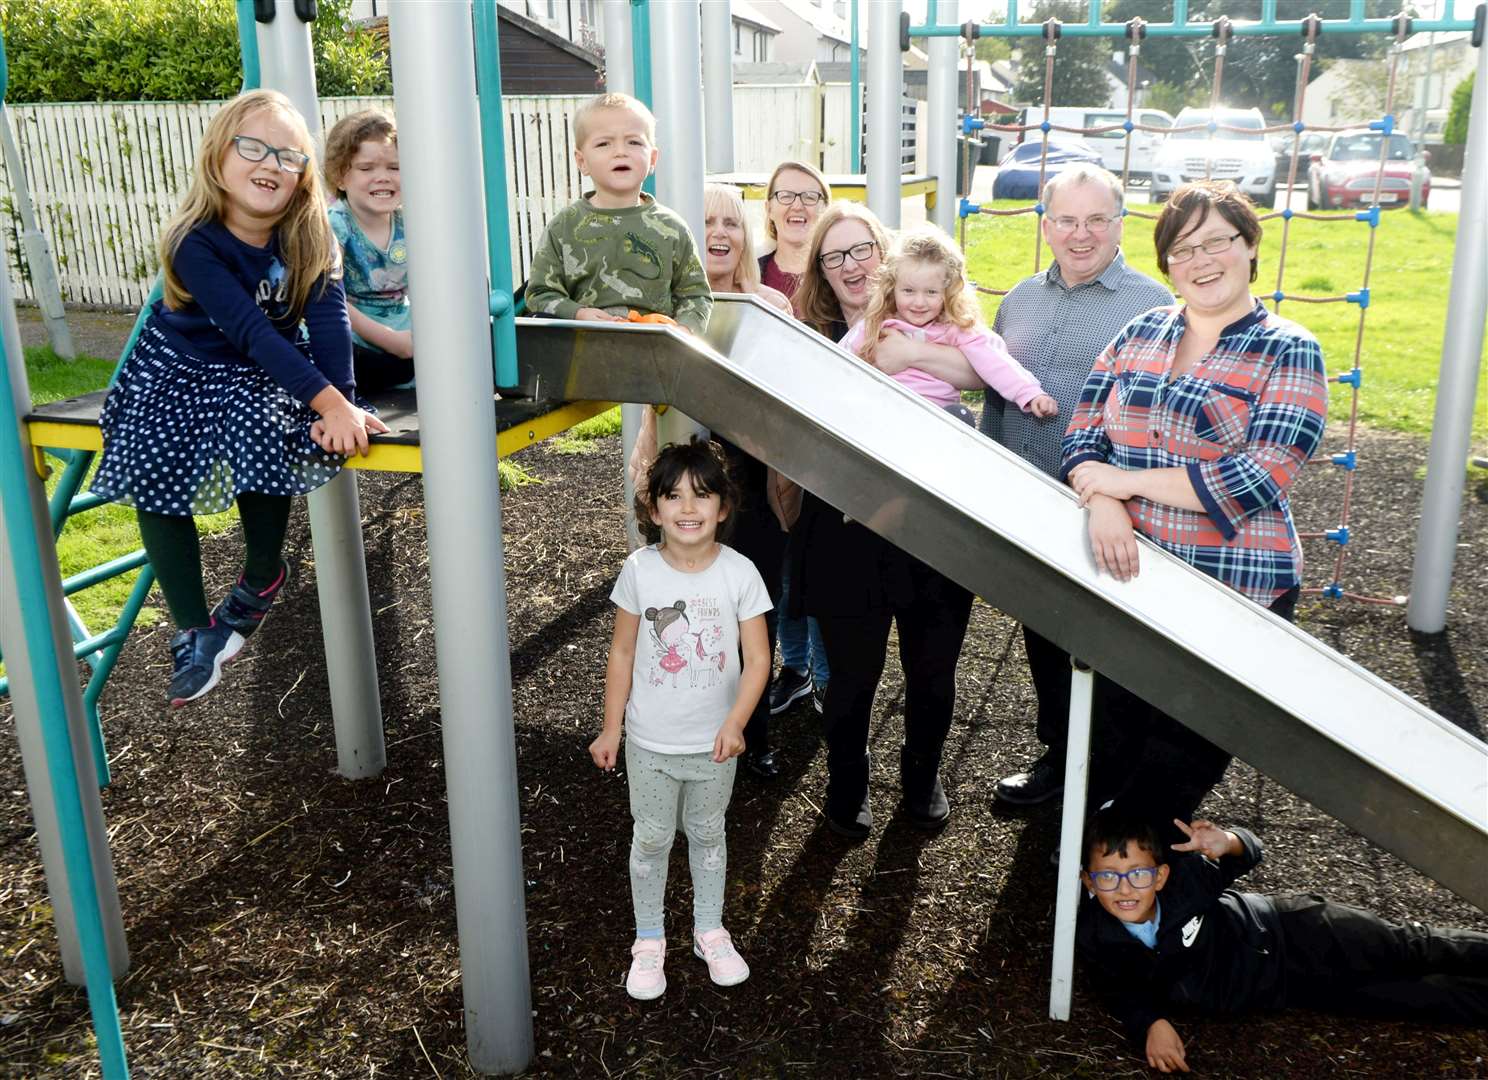 Orchard Park in Beauly: Helen Carmichael, local councillor, Angela Black, Iren Simon, locals, David Fraser, local councillor and Laura Pranaitiene, local with the local children.Picture: James Mackenzie.